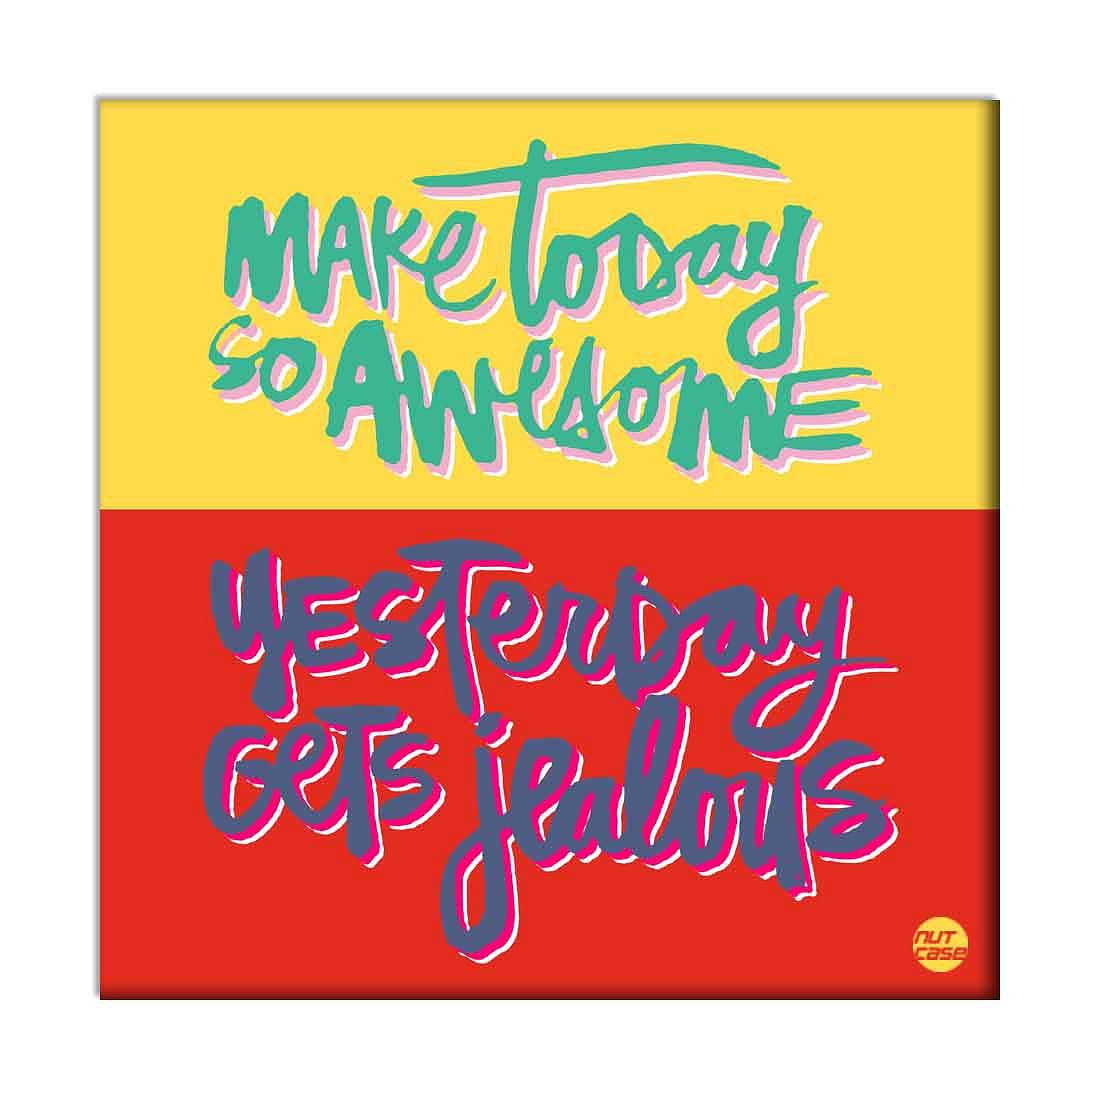 Wall Art Decor Panel For Home - Make Today Awesome Nutcase